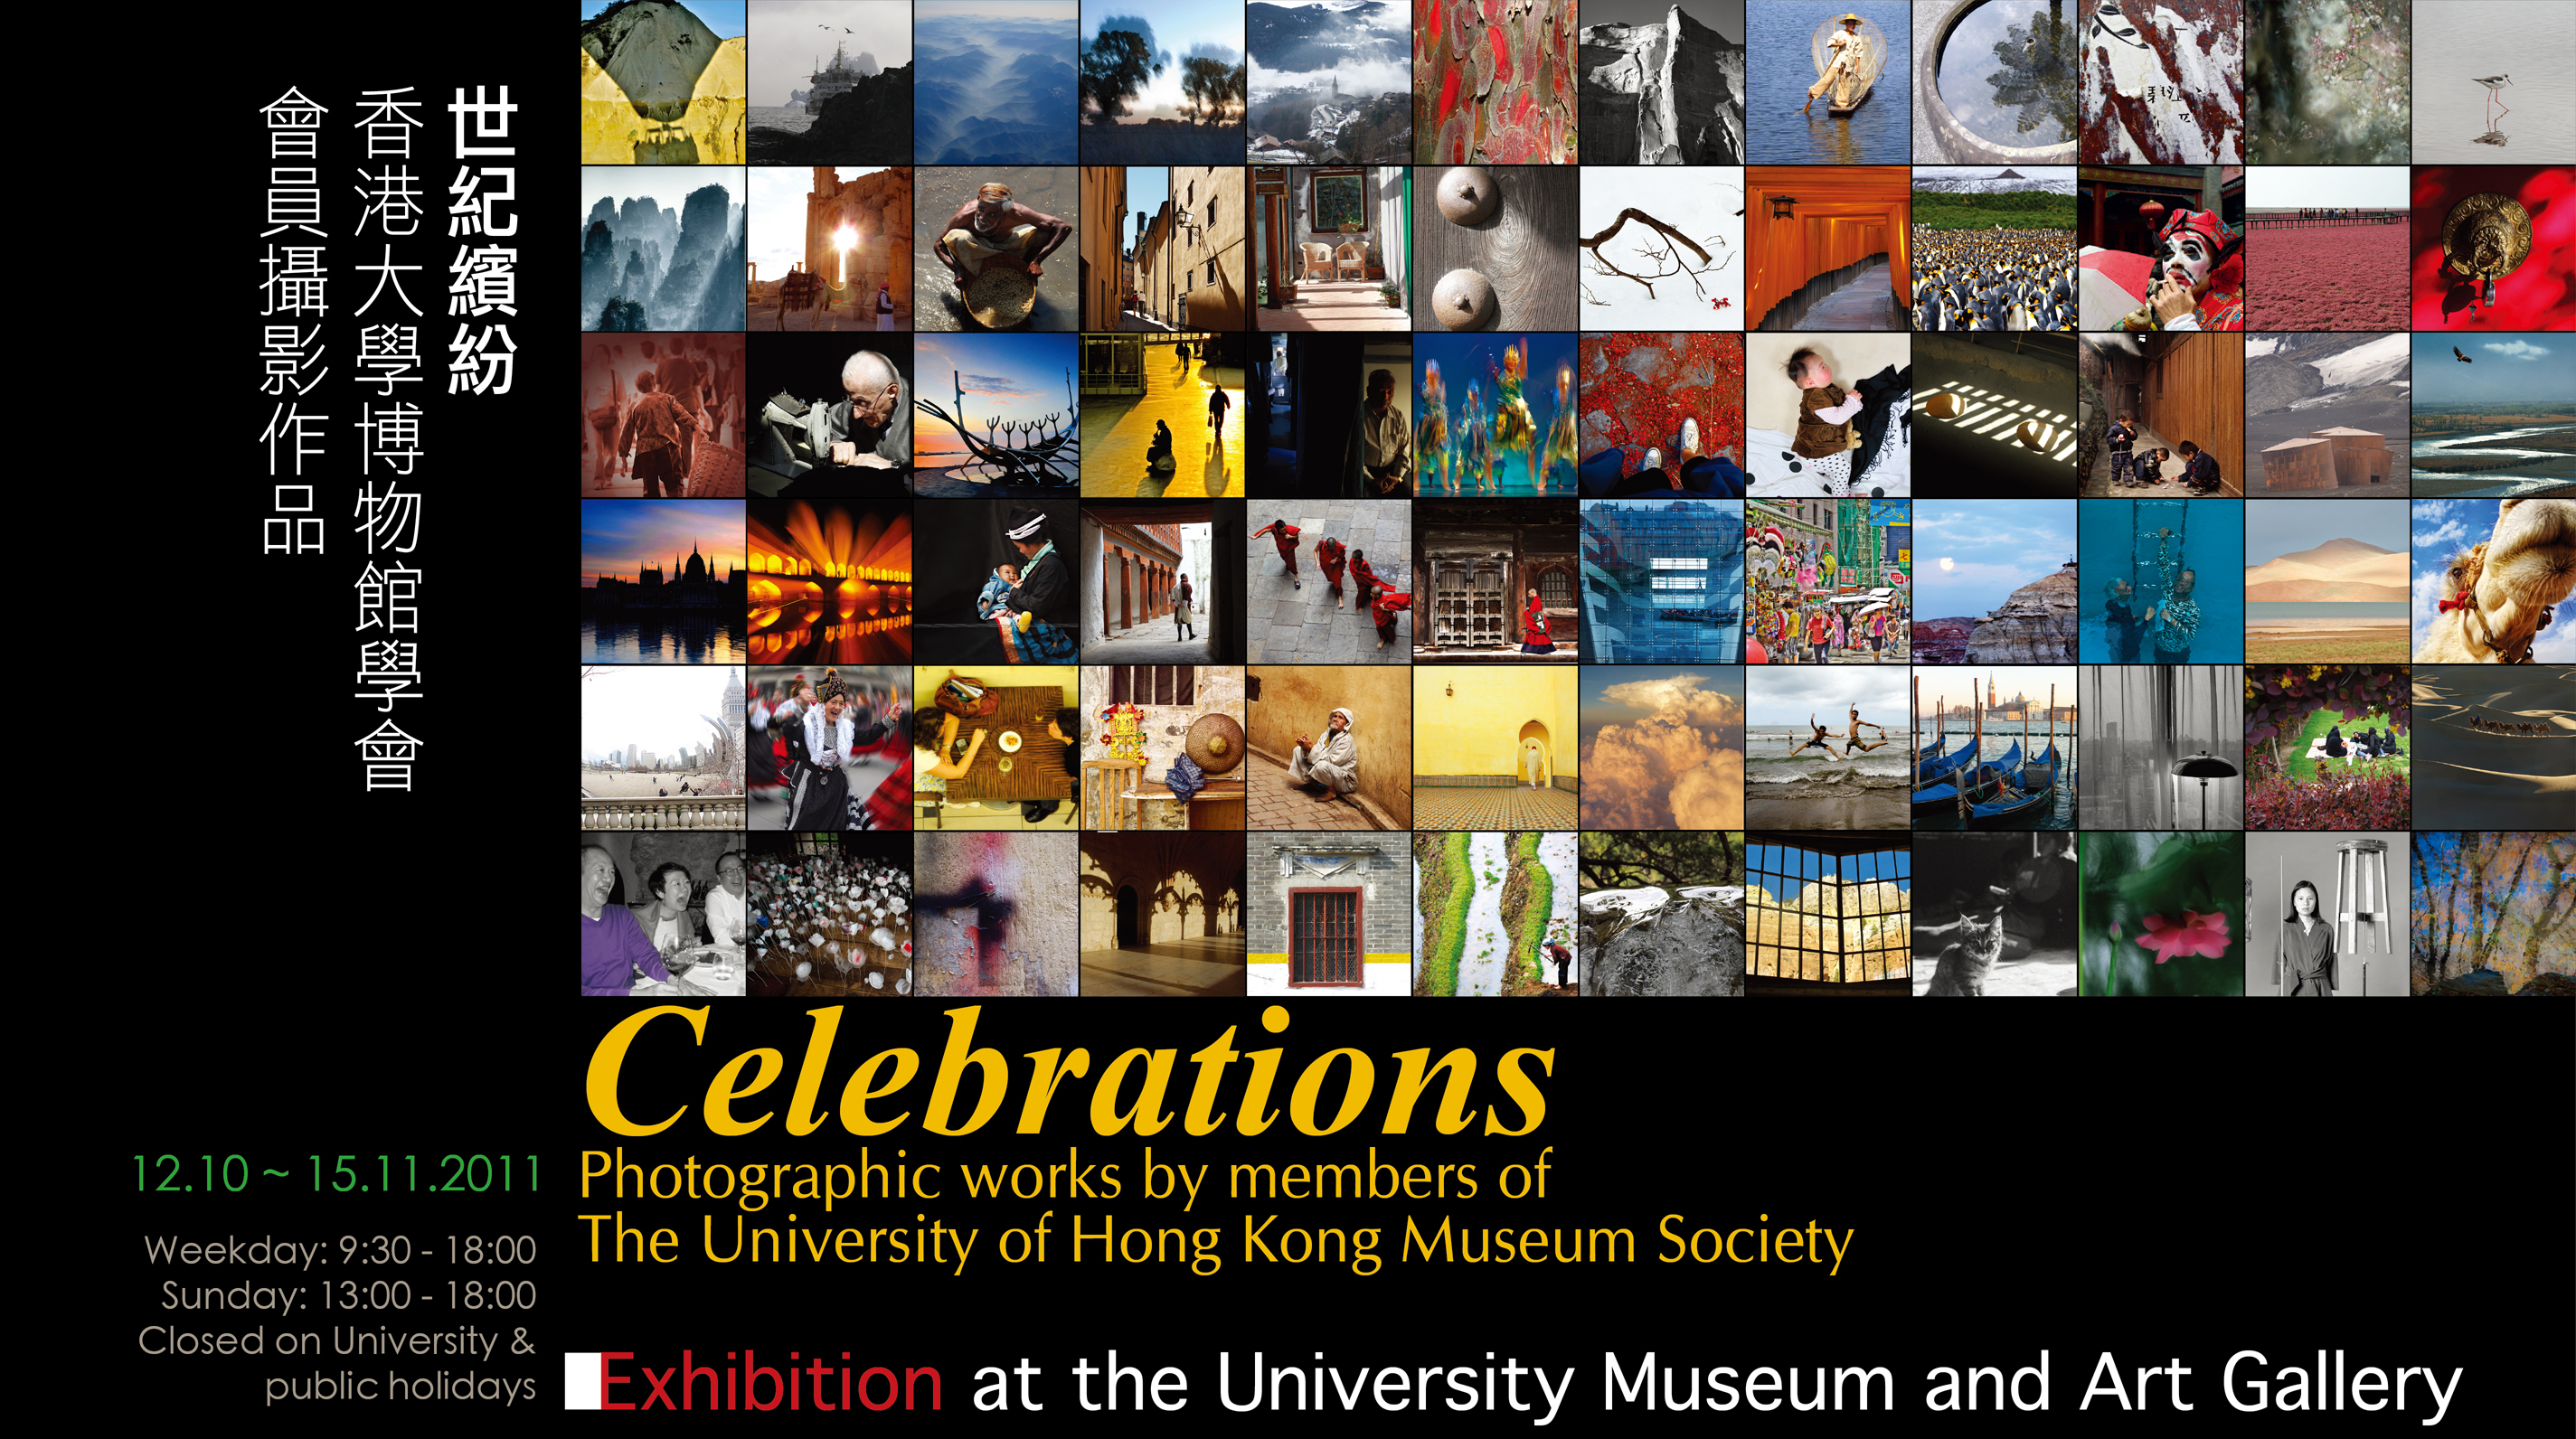 Celebrations: Photographic works by members of the University of Hong Kong Museum Society